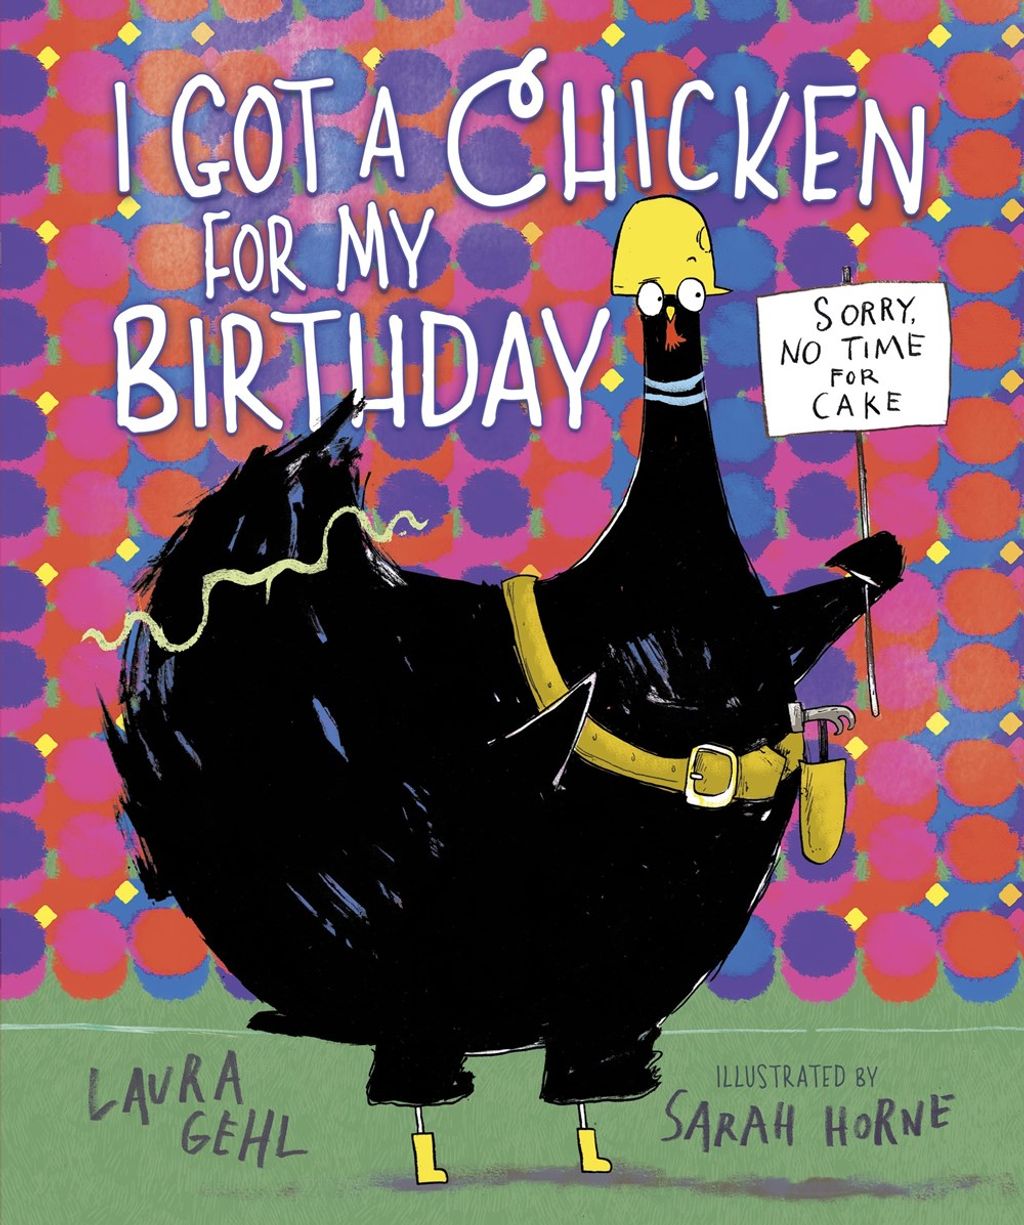 Book Cover of I Got a Chicken For My Birthday